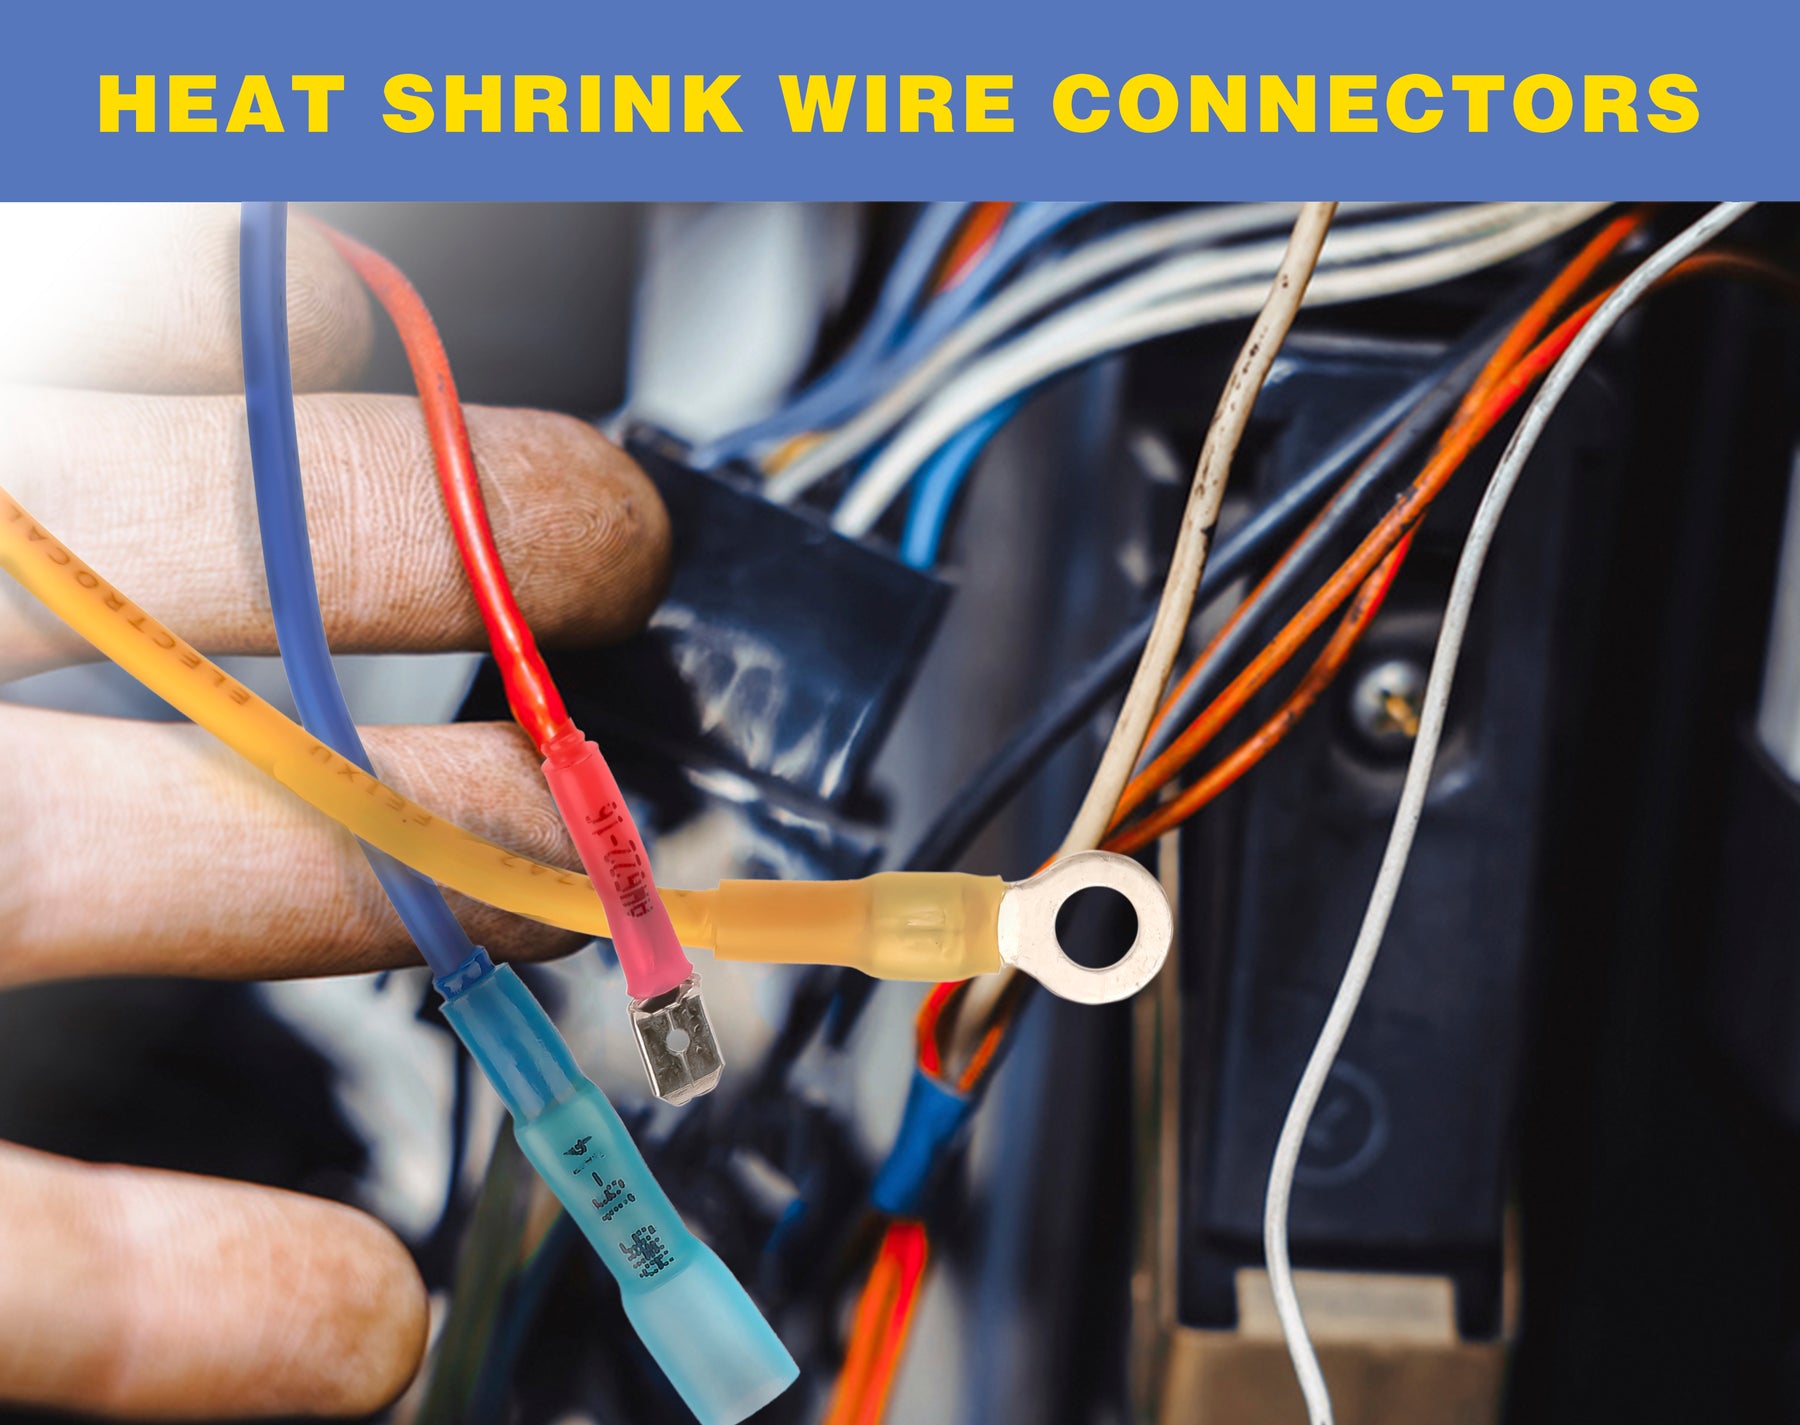 200PCS Marine Grade Heat Shrink Butt Connectors | Waterproof Wire Connectors | Tinned Red Copper